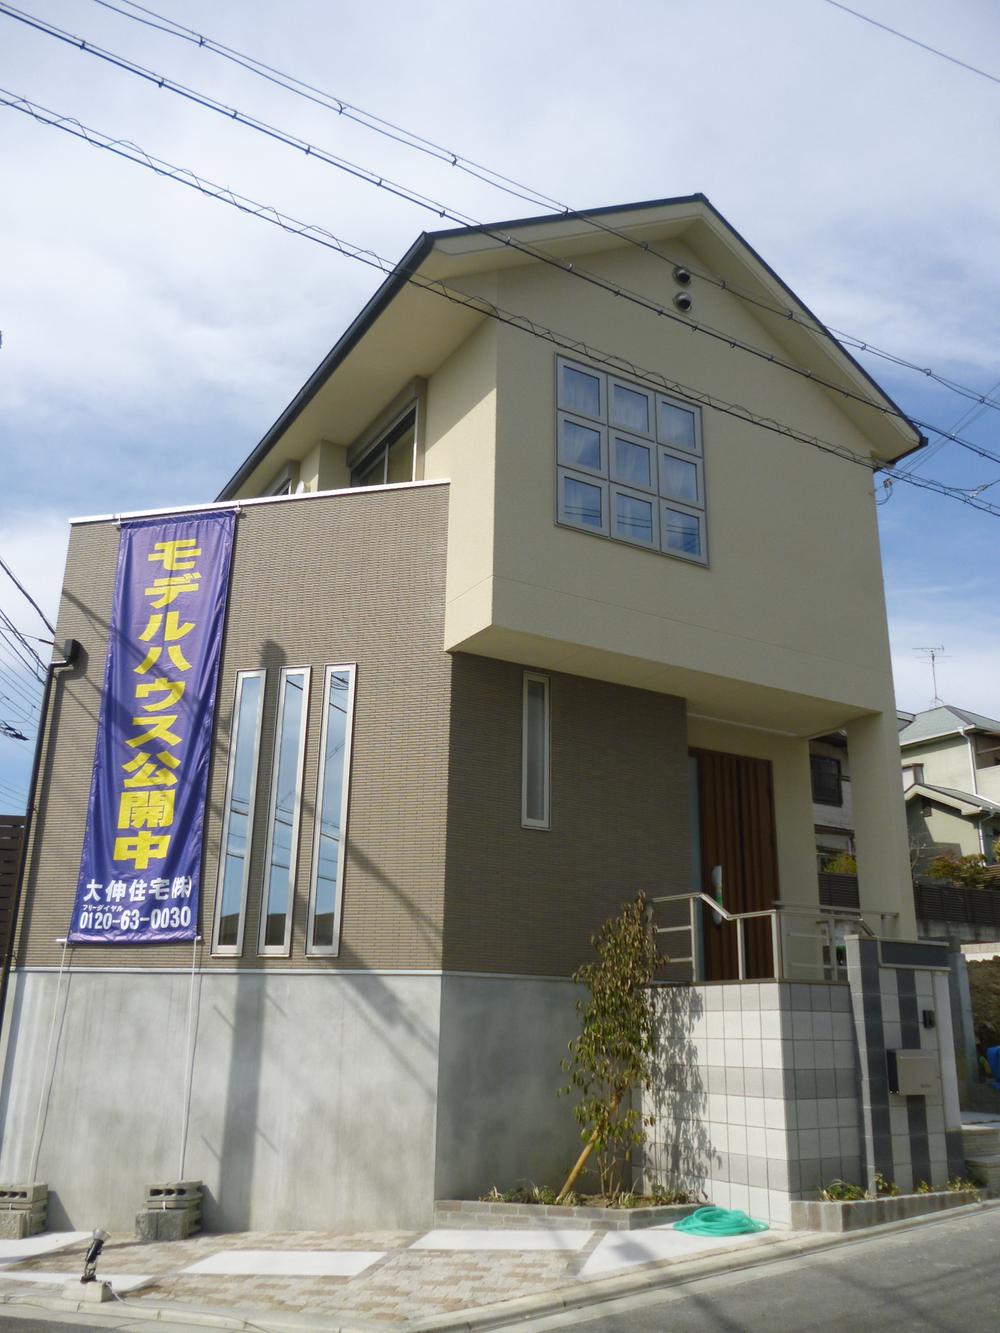 Local appearance photo.  ・ 4LDK + 2 cars garage  ・ Solar power installed  ・ Land 37.82 square meters  ・ Building 32.59 square meters